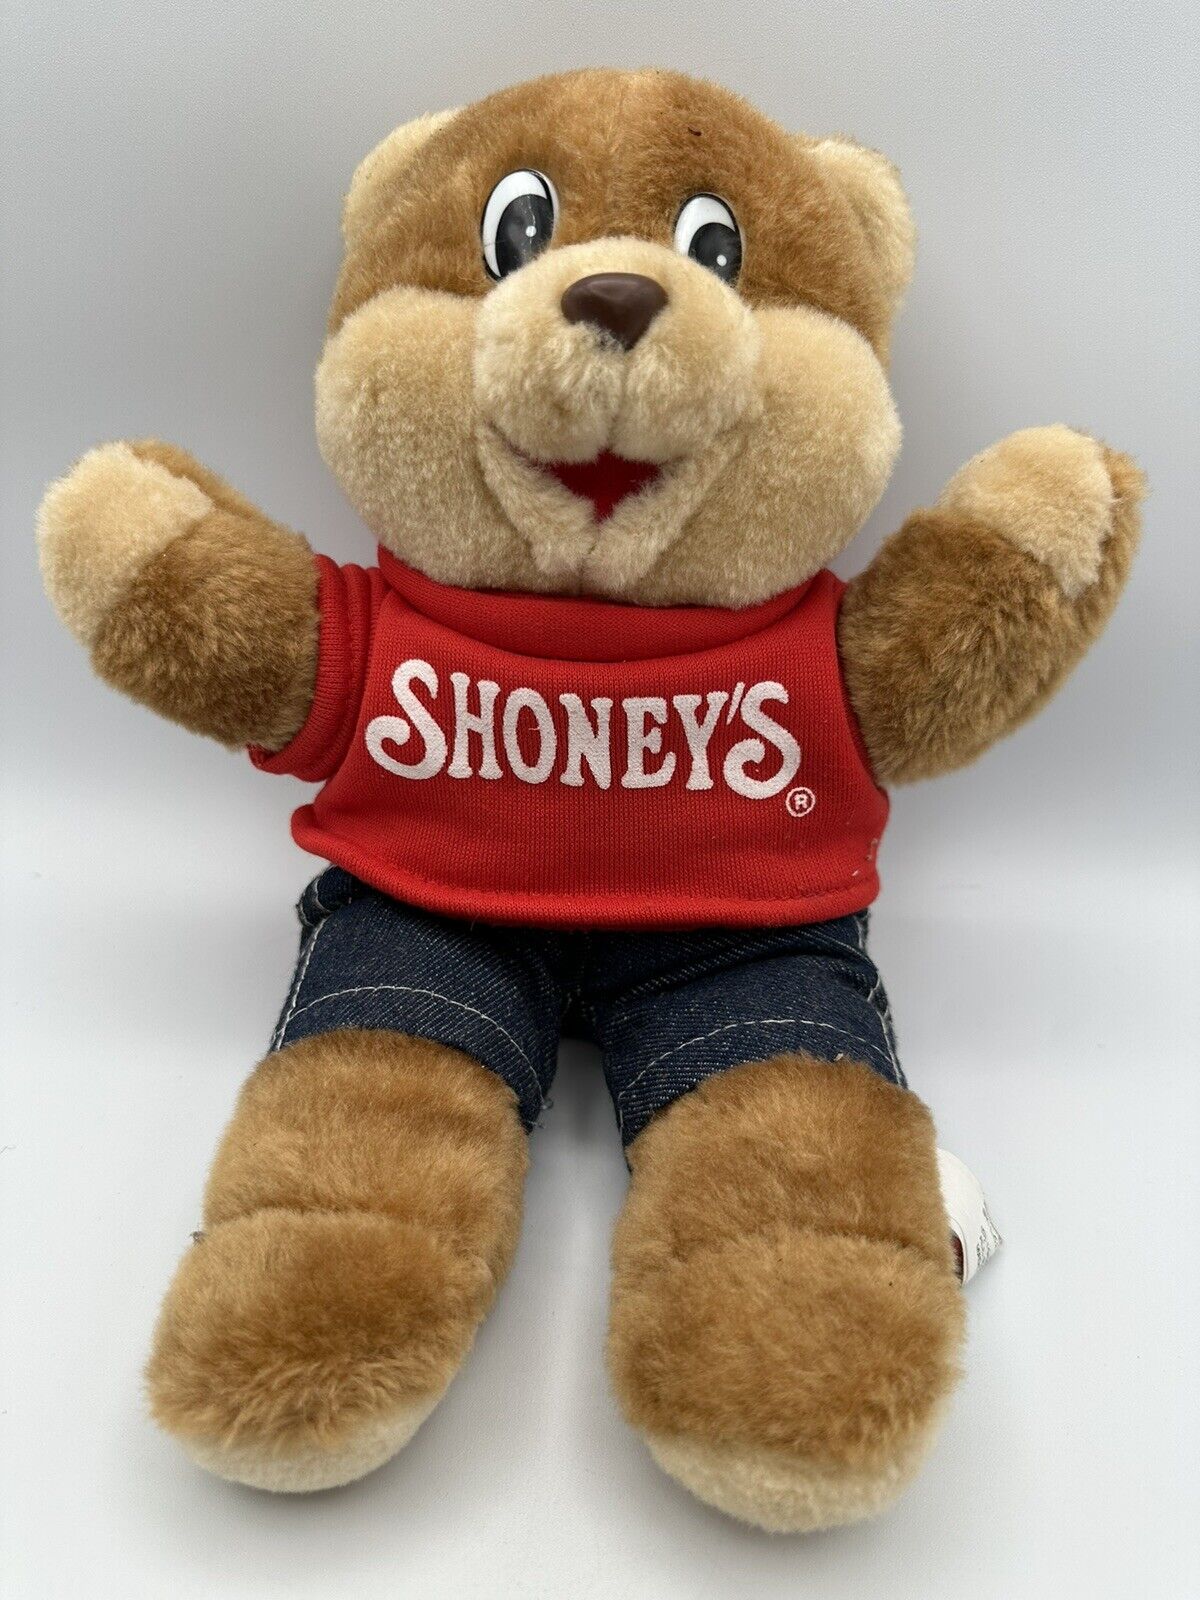 SHONEY’S BEAR 8 Inches Tall VINTAGE 1989 (Great Condition)